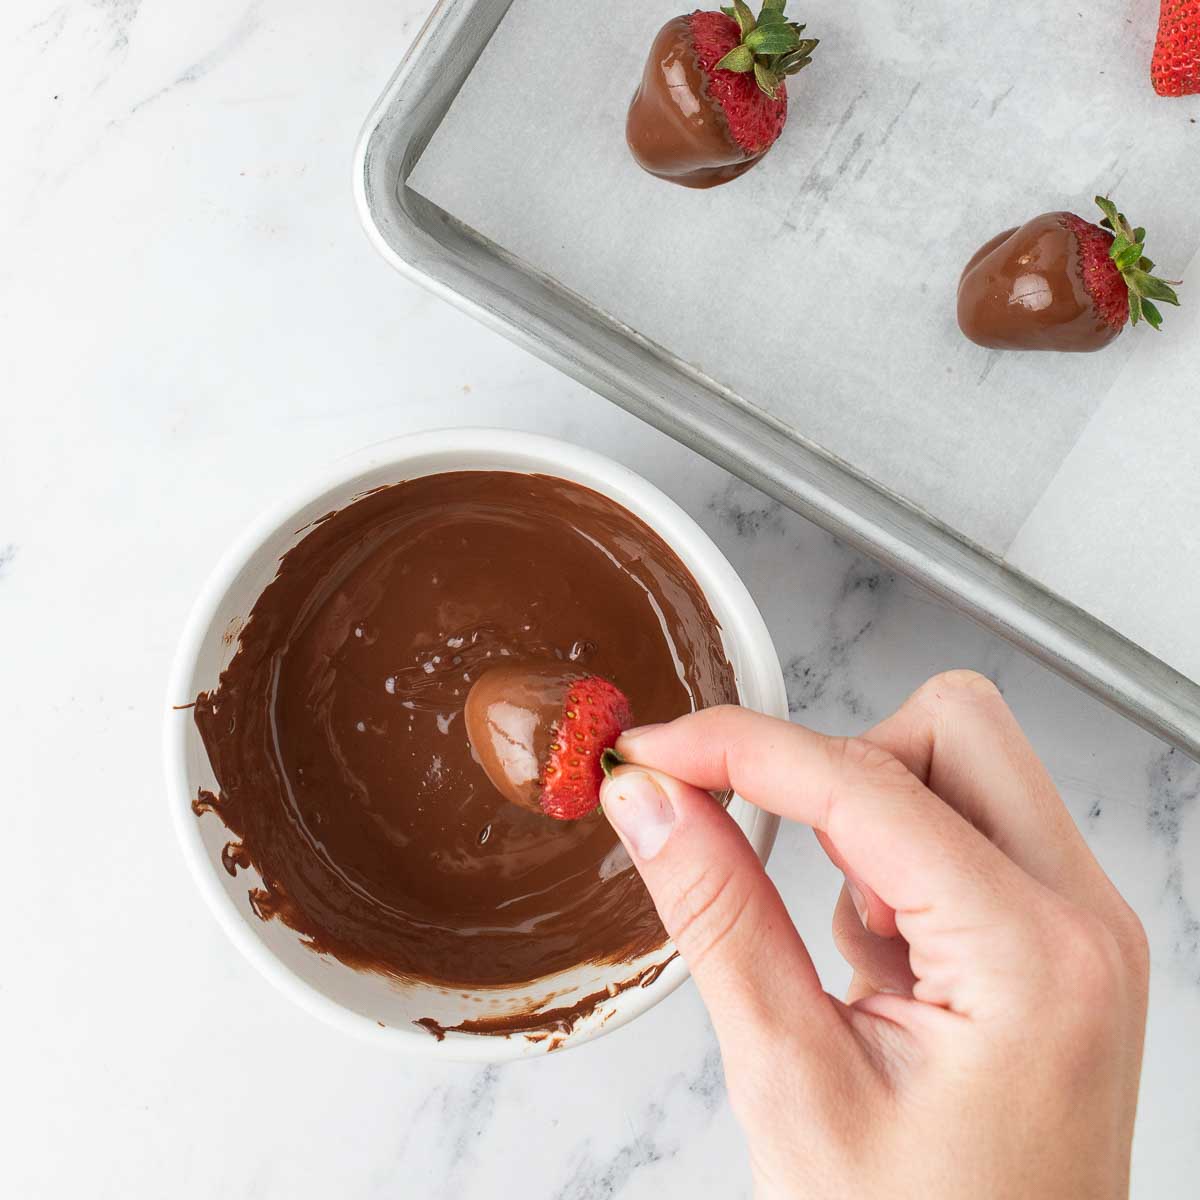 Hand dipping a strawberry in melted chocolate, two dipped strawberries on parchment paper on a baking sheet.